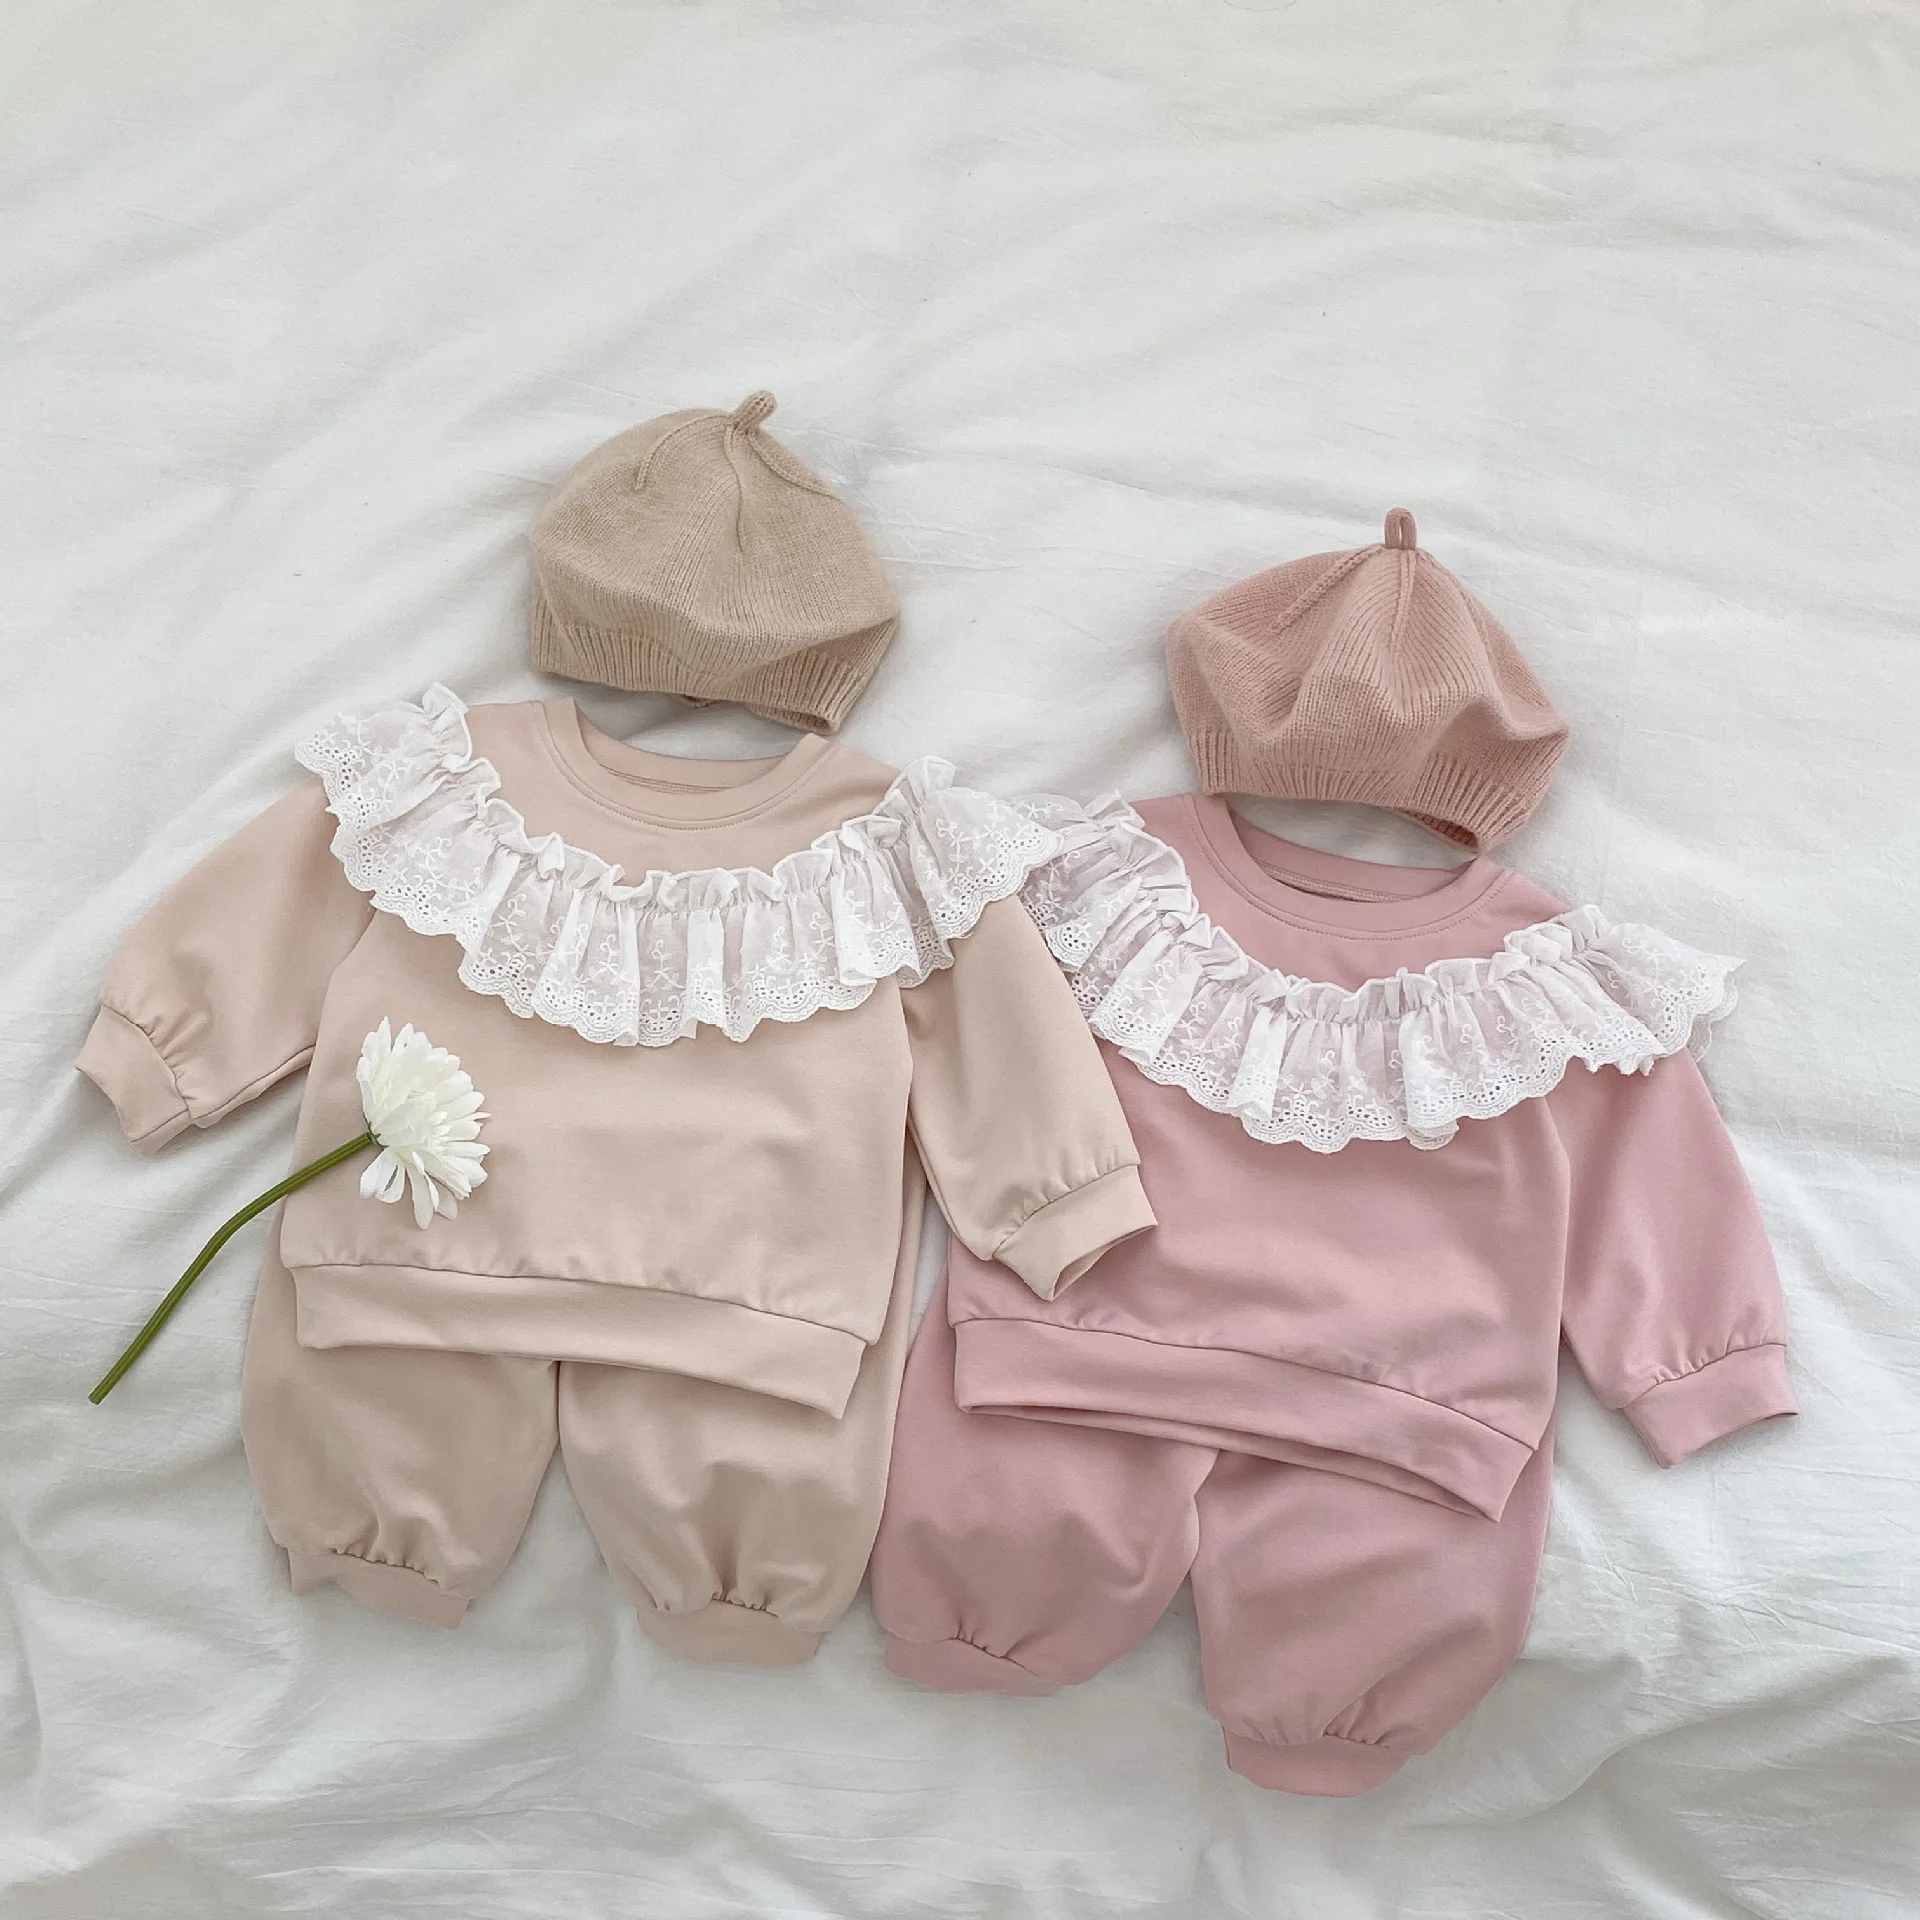 

Girl Kids Sweatshirts Hollow-out Decorative Border Tops And Toddler Infant Boutique Cotton Sweatpants Spring Fashion Set